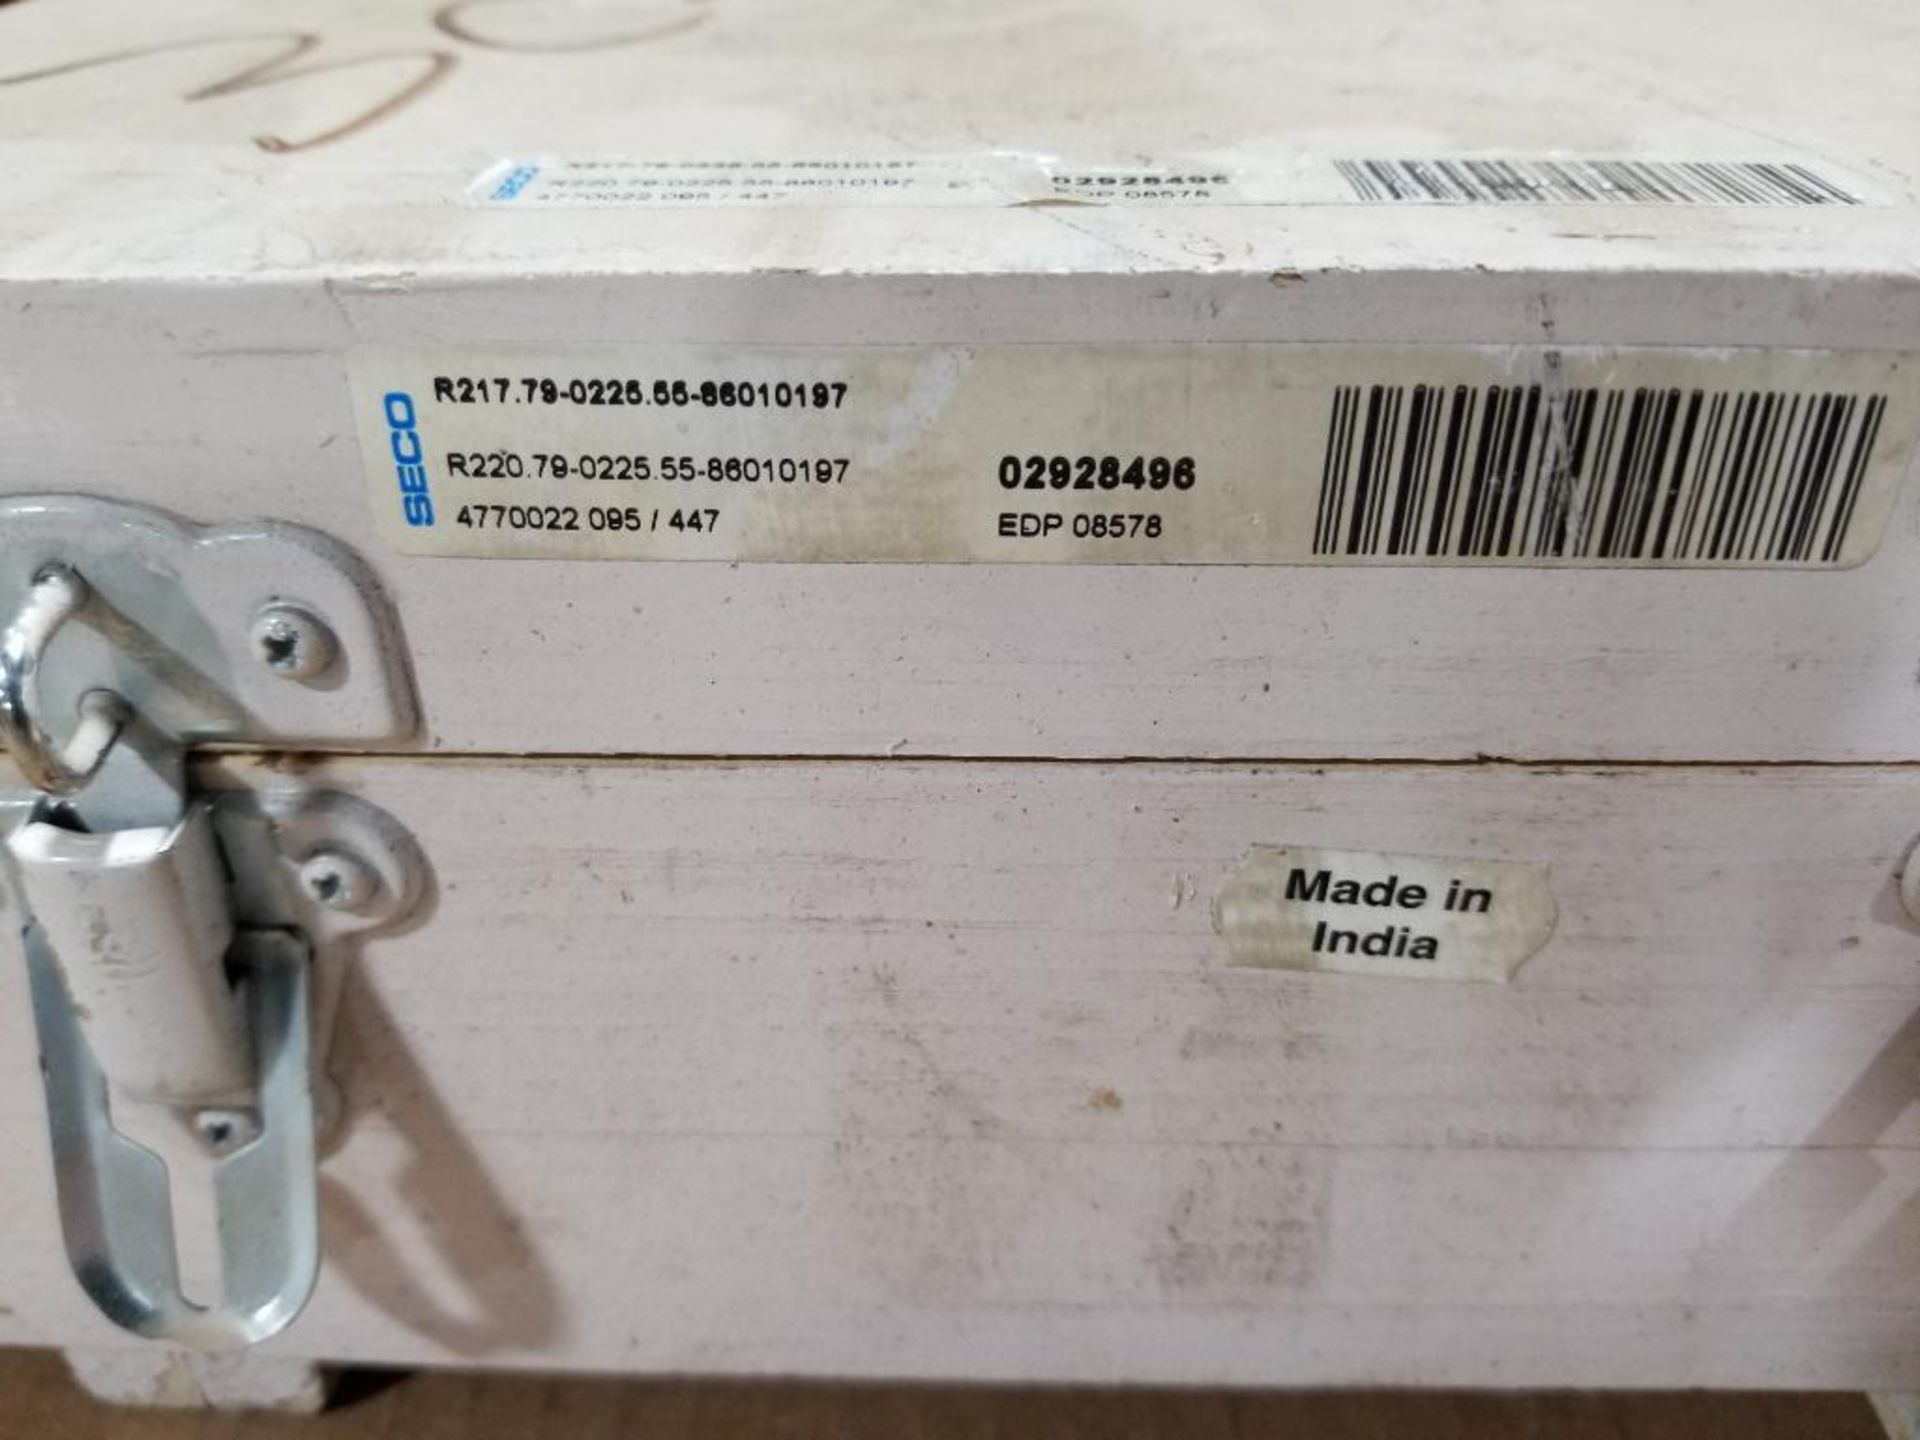 Seco face mill. Part number R217.79-0225.55-86010197. - Image 3 of 6